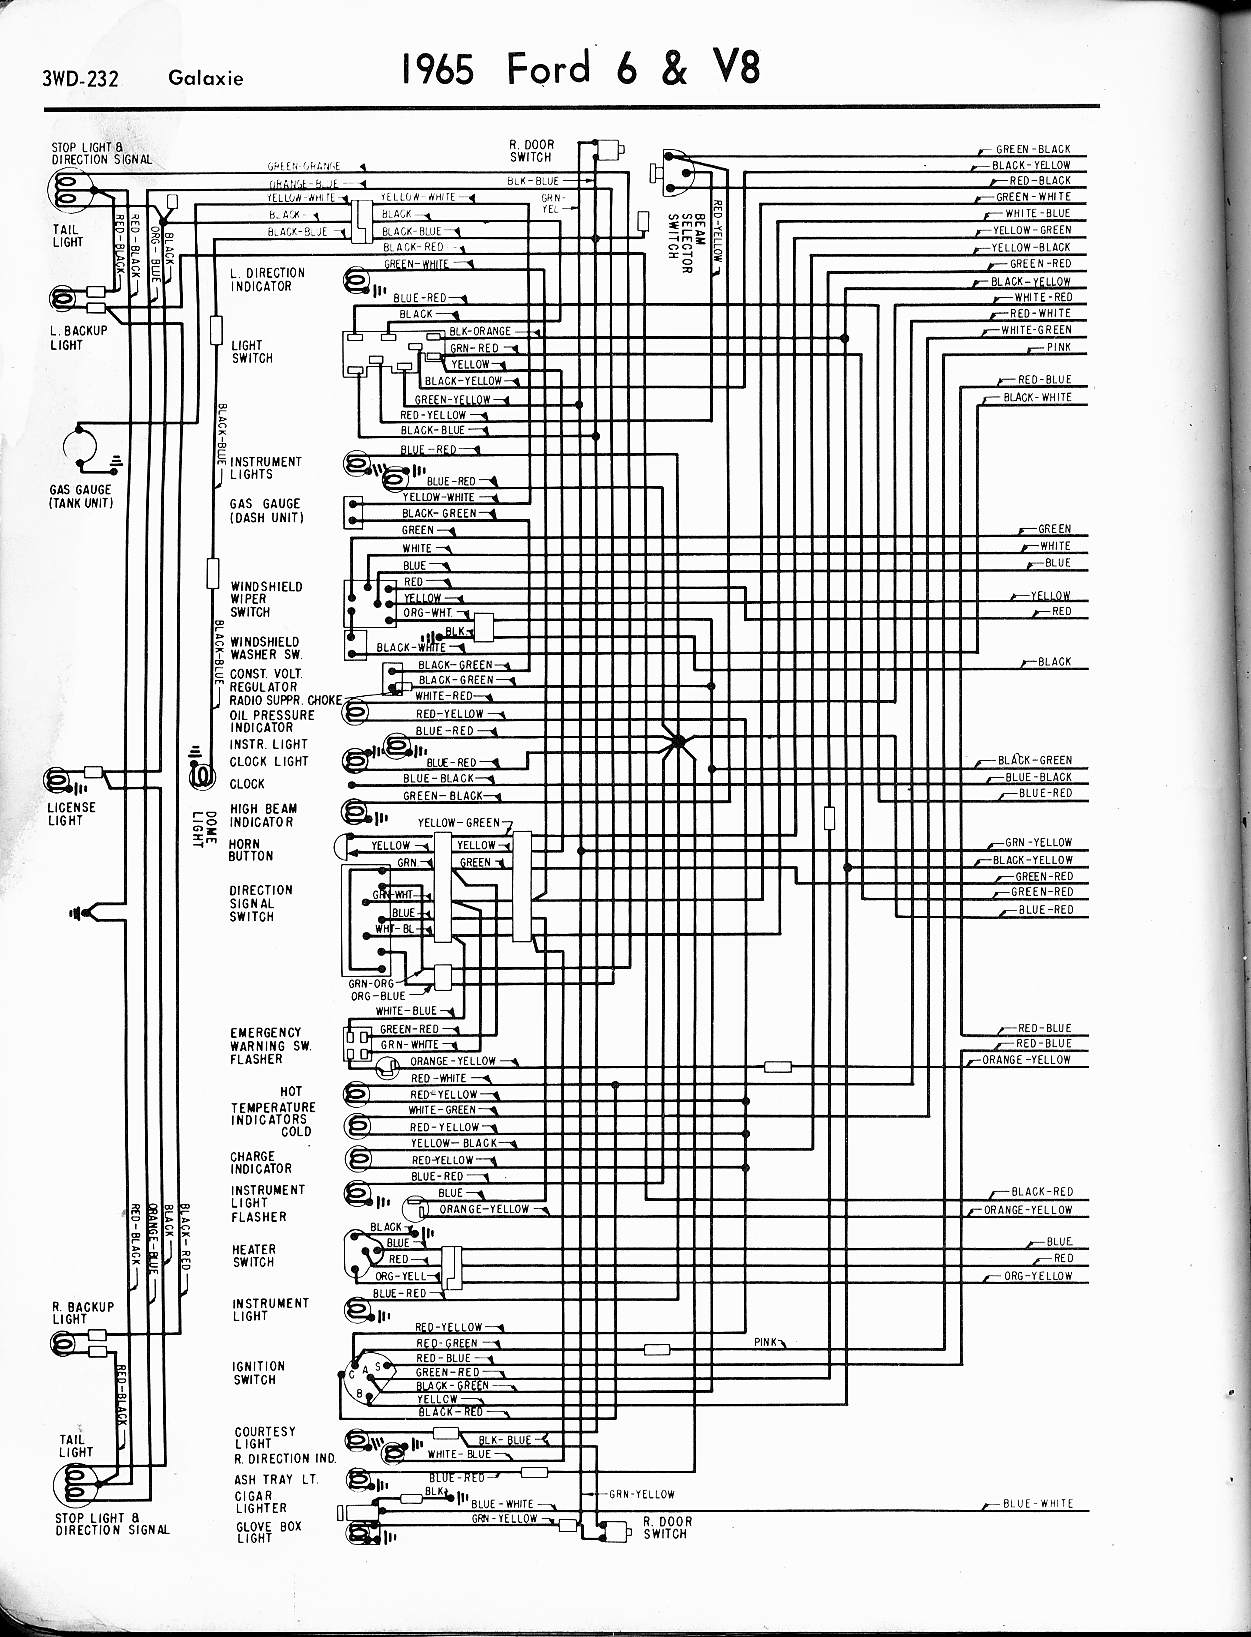 2001 Ford Focus Fuel Pump Wiring Diagram from www.oldcarmanualproject.com